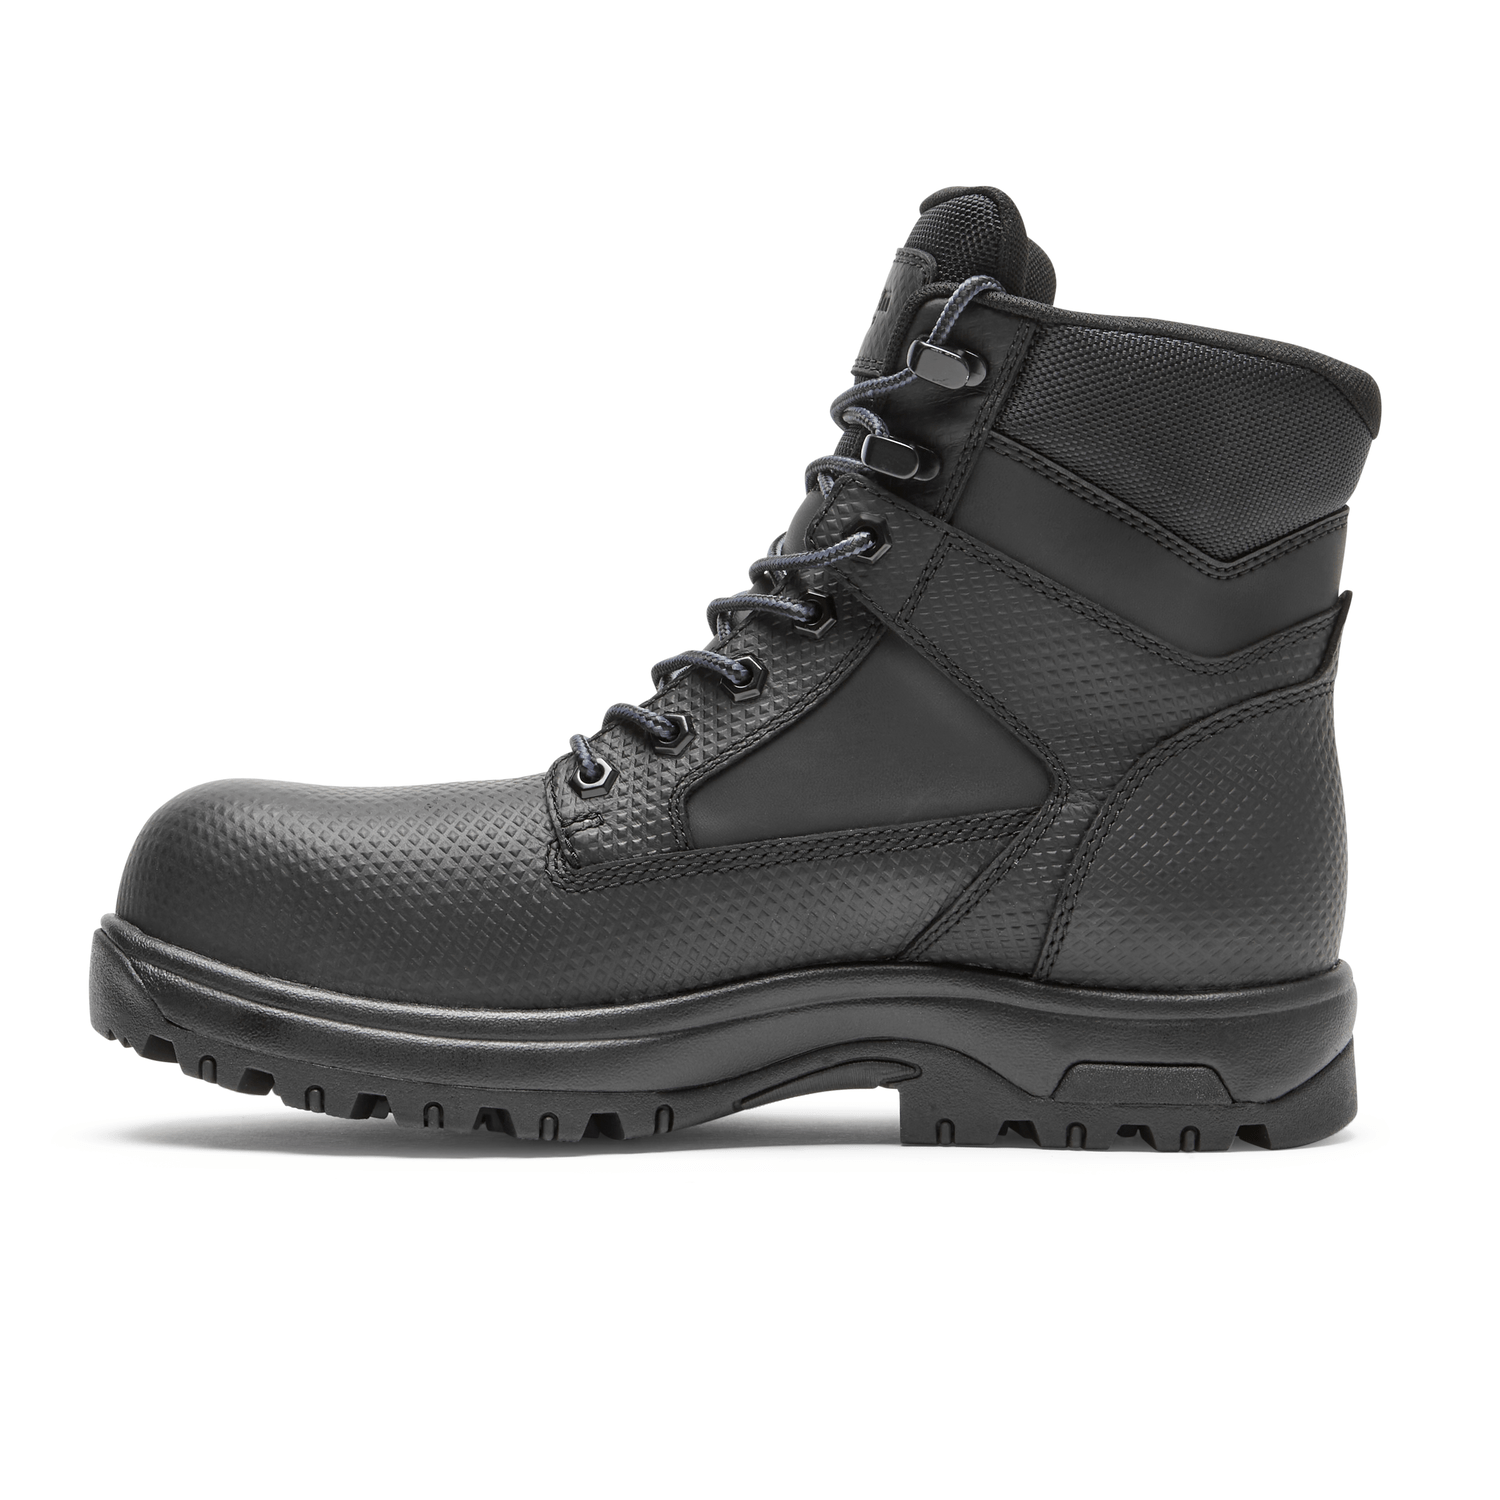 8000Works Safety Plain Toe Boot – Waterproof product image